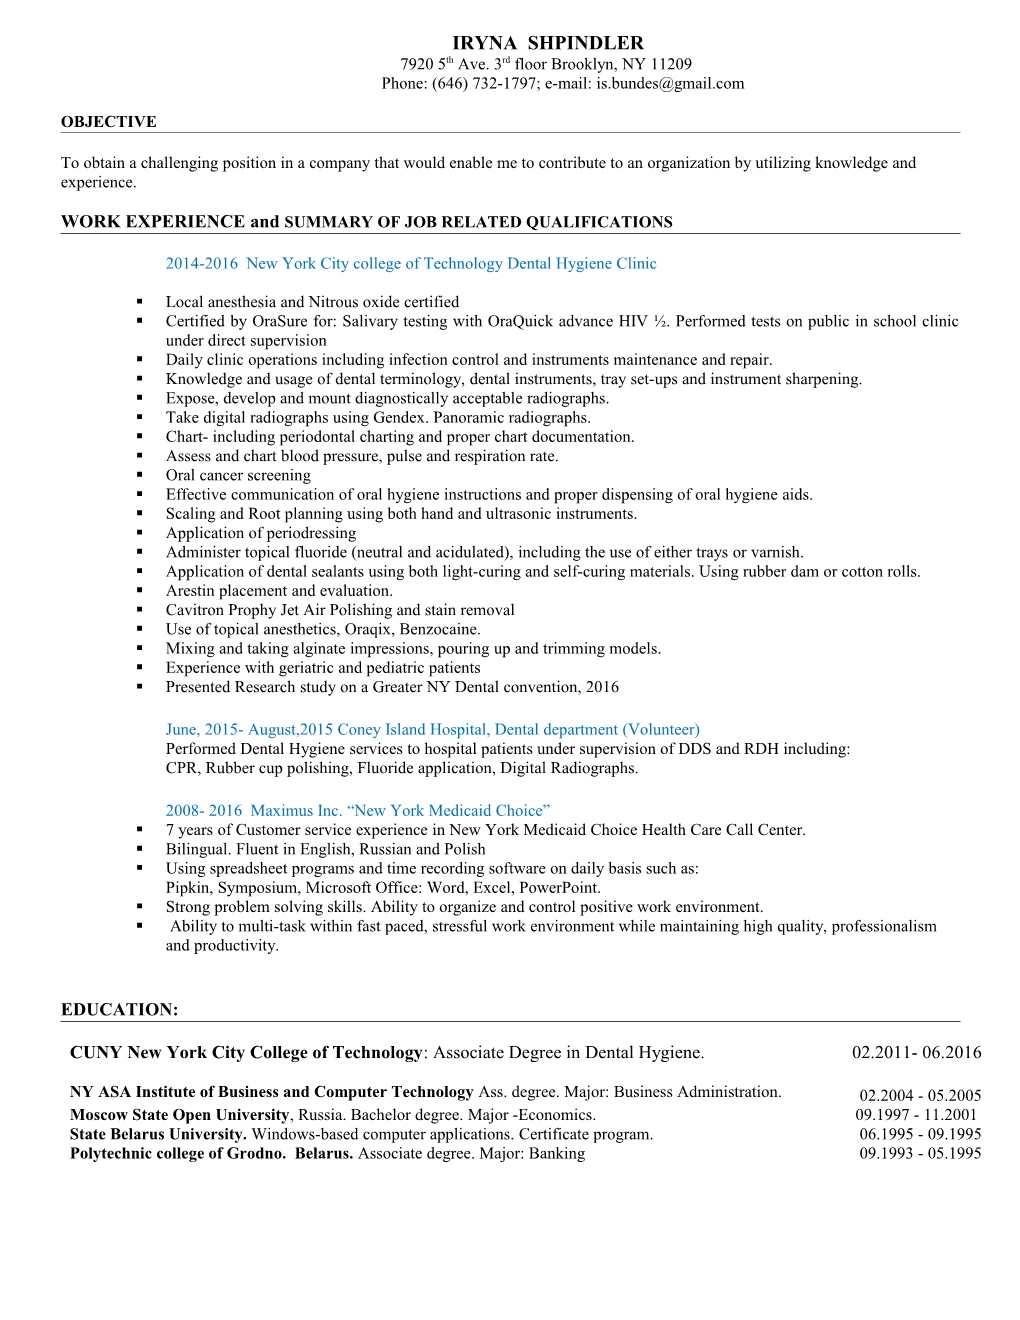 WORK EXPERIENCE and SUMMARY of JOB RELATED QUALIFICATIONS